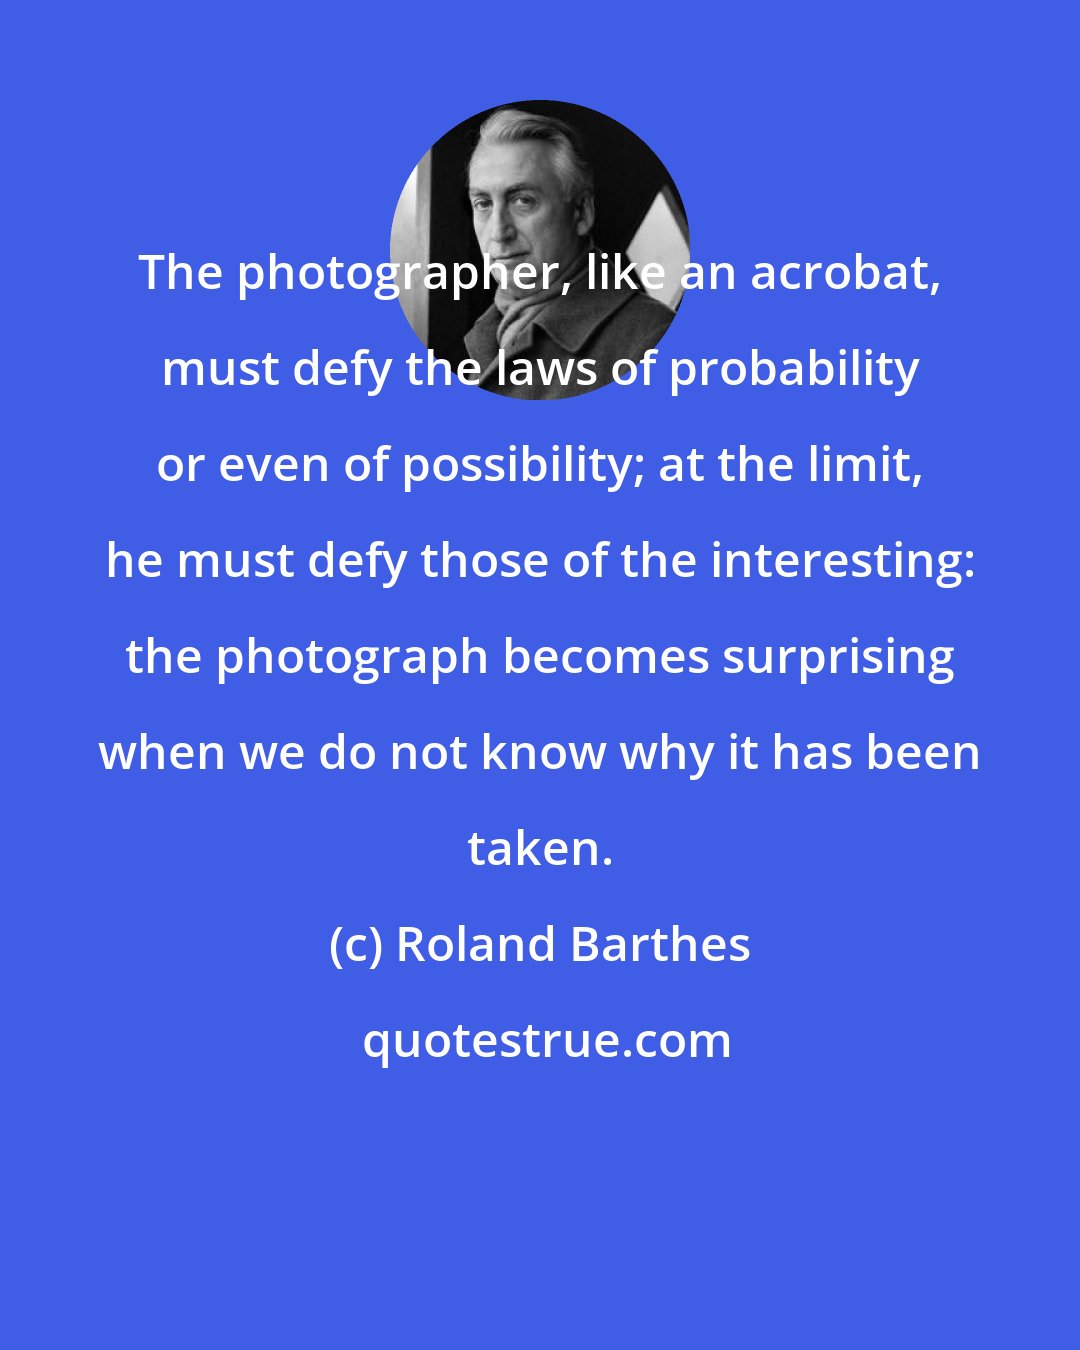 Roland Barthes: The photographer, like an acrobat, must defy the laws of probability or even of possibility; at the limit, he must defy those of the interesting: the photograph becomes surprising when we do not know why it has been taken.